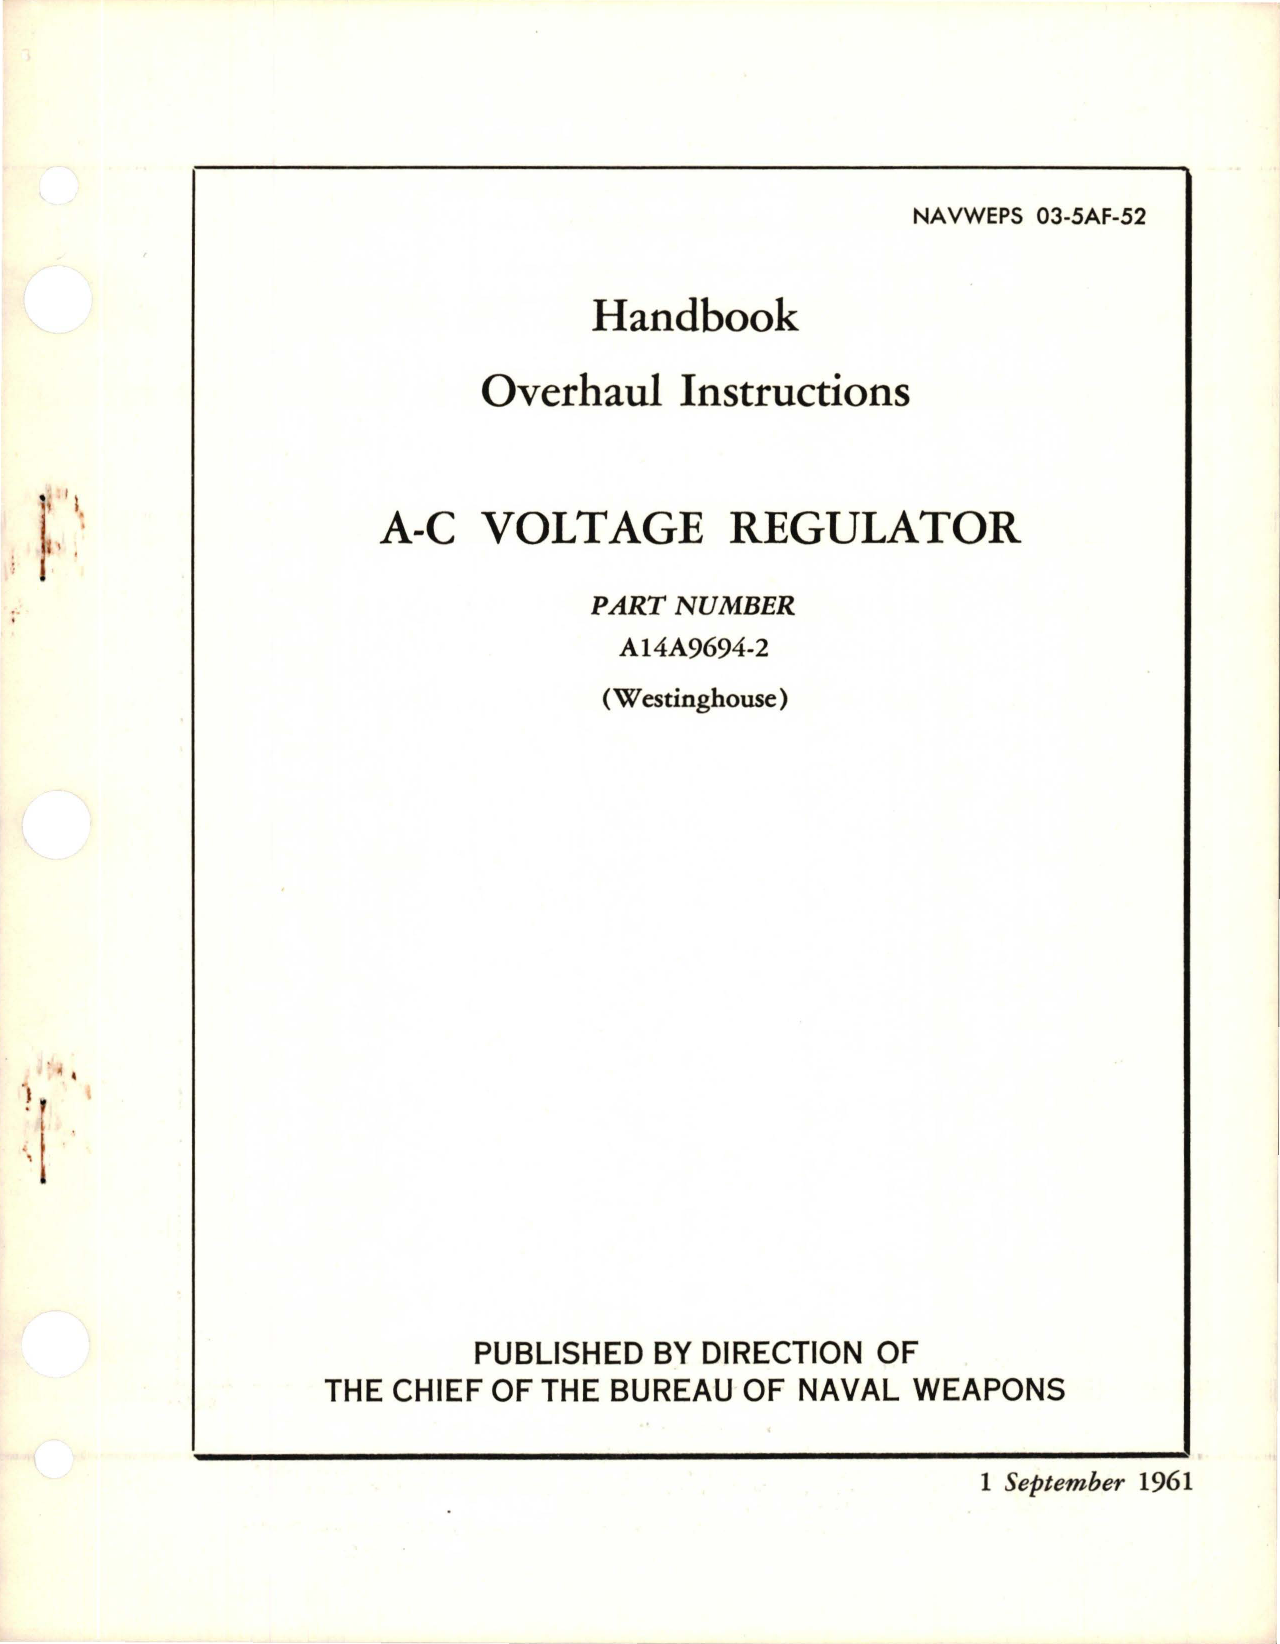 Sample page 1 from AirCorps Library document: Overhaul Instructions for AC Voltage Regulator - Part A14A9694-2 